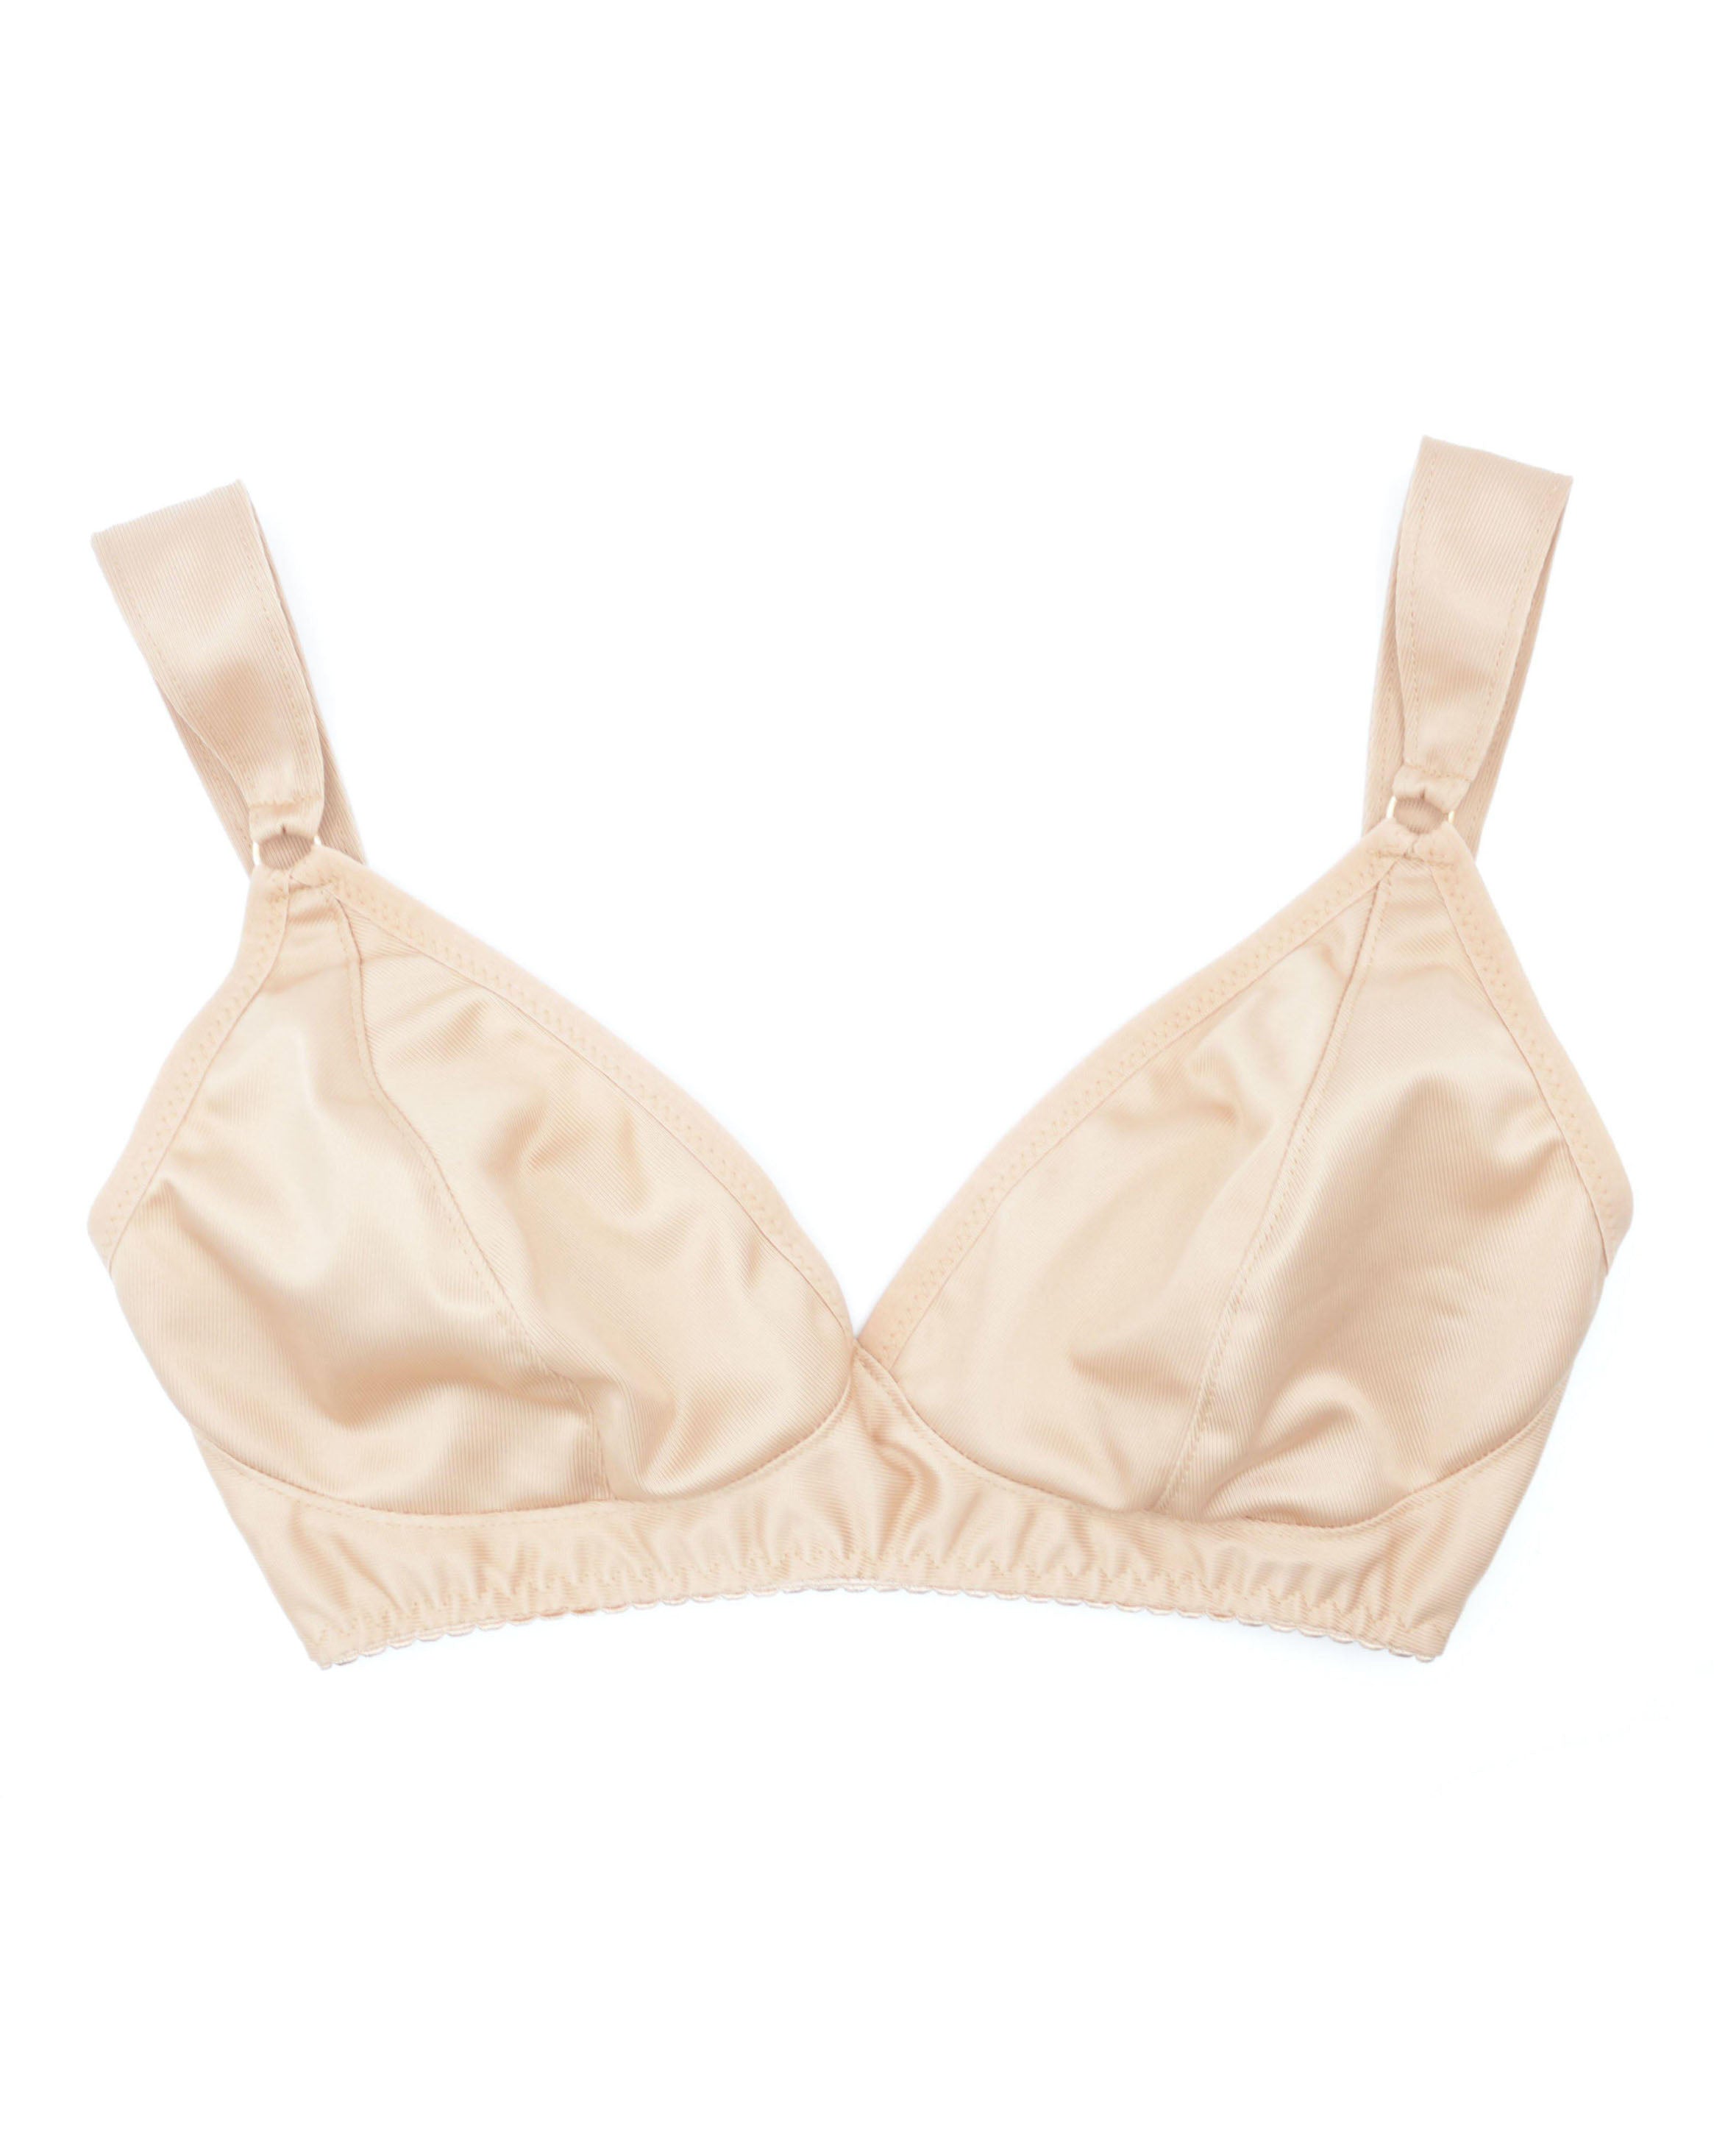 GRACING Non-Wired Push Up Bra- Silky Texture Fabric (size 36B)